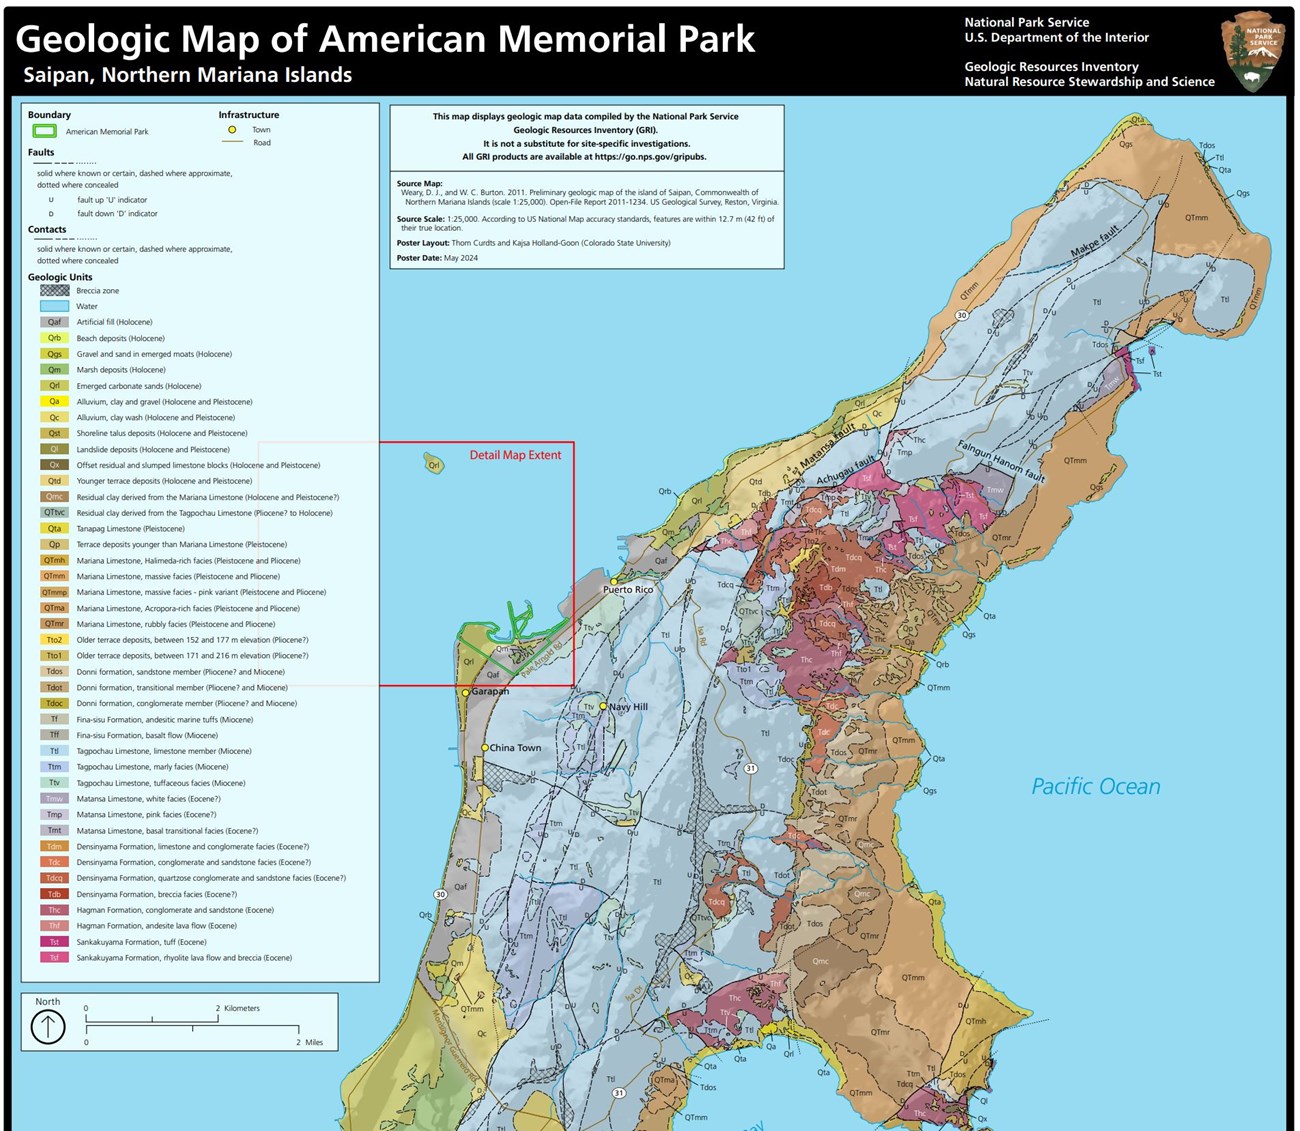 Image of a geologic map.